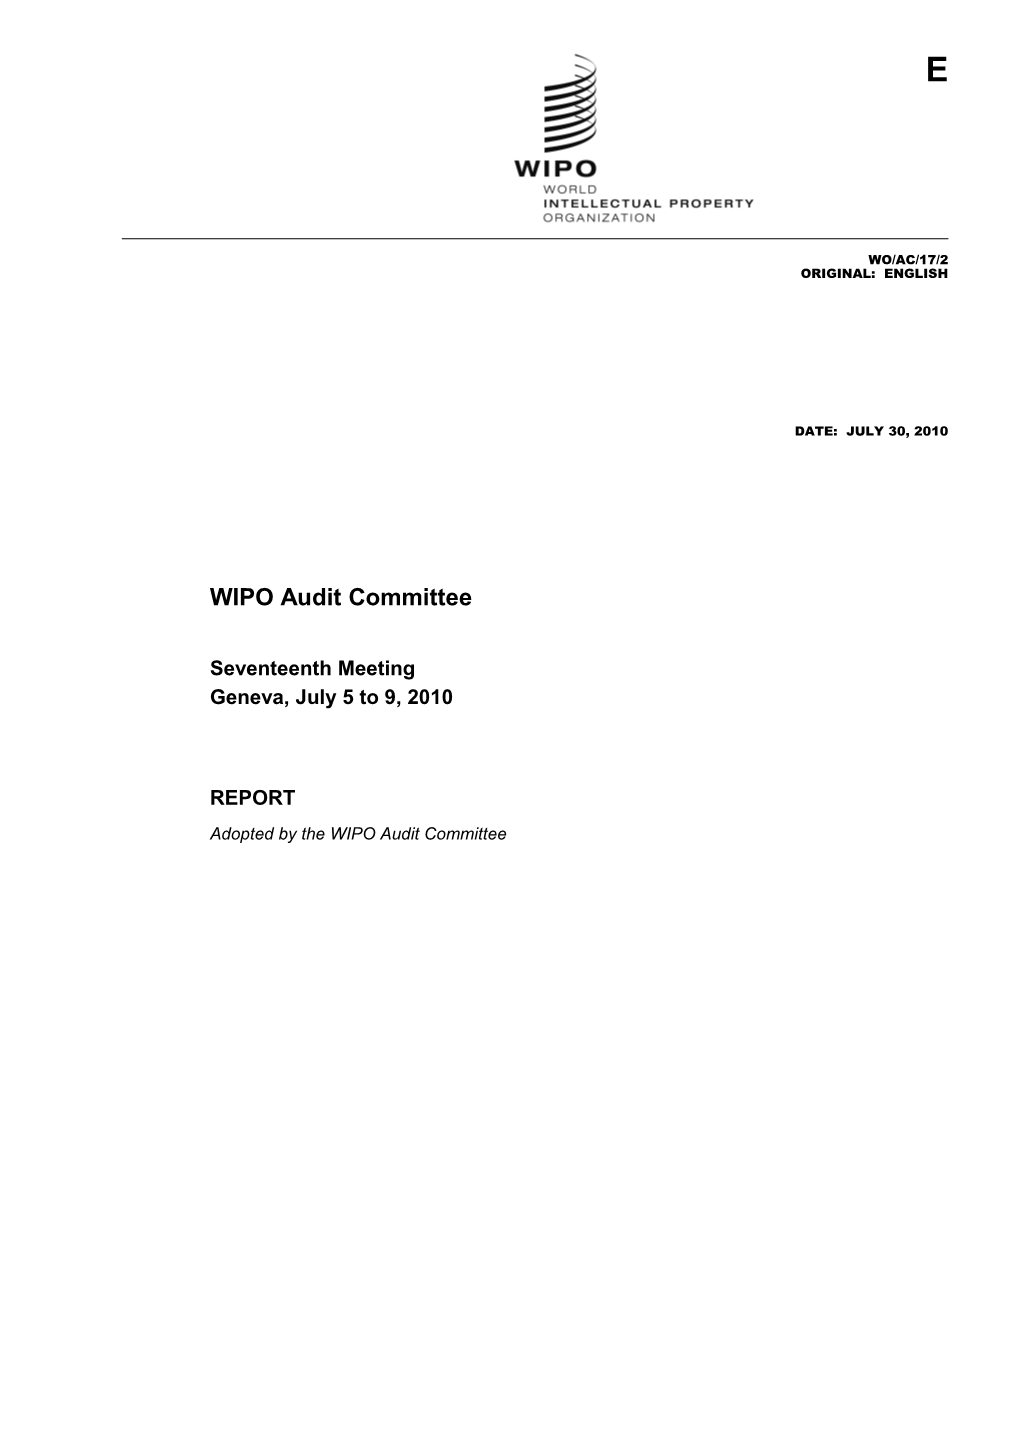 WIPO Audit Committee